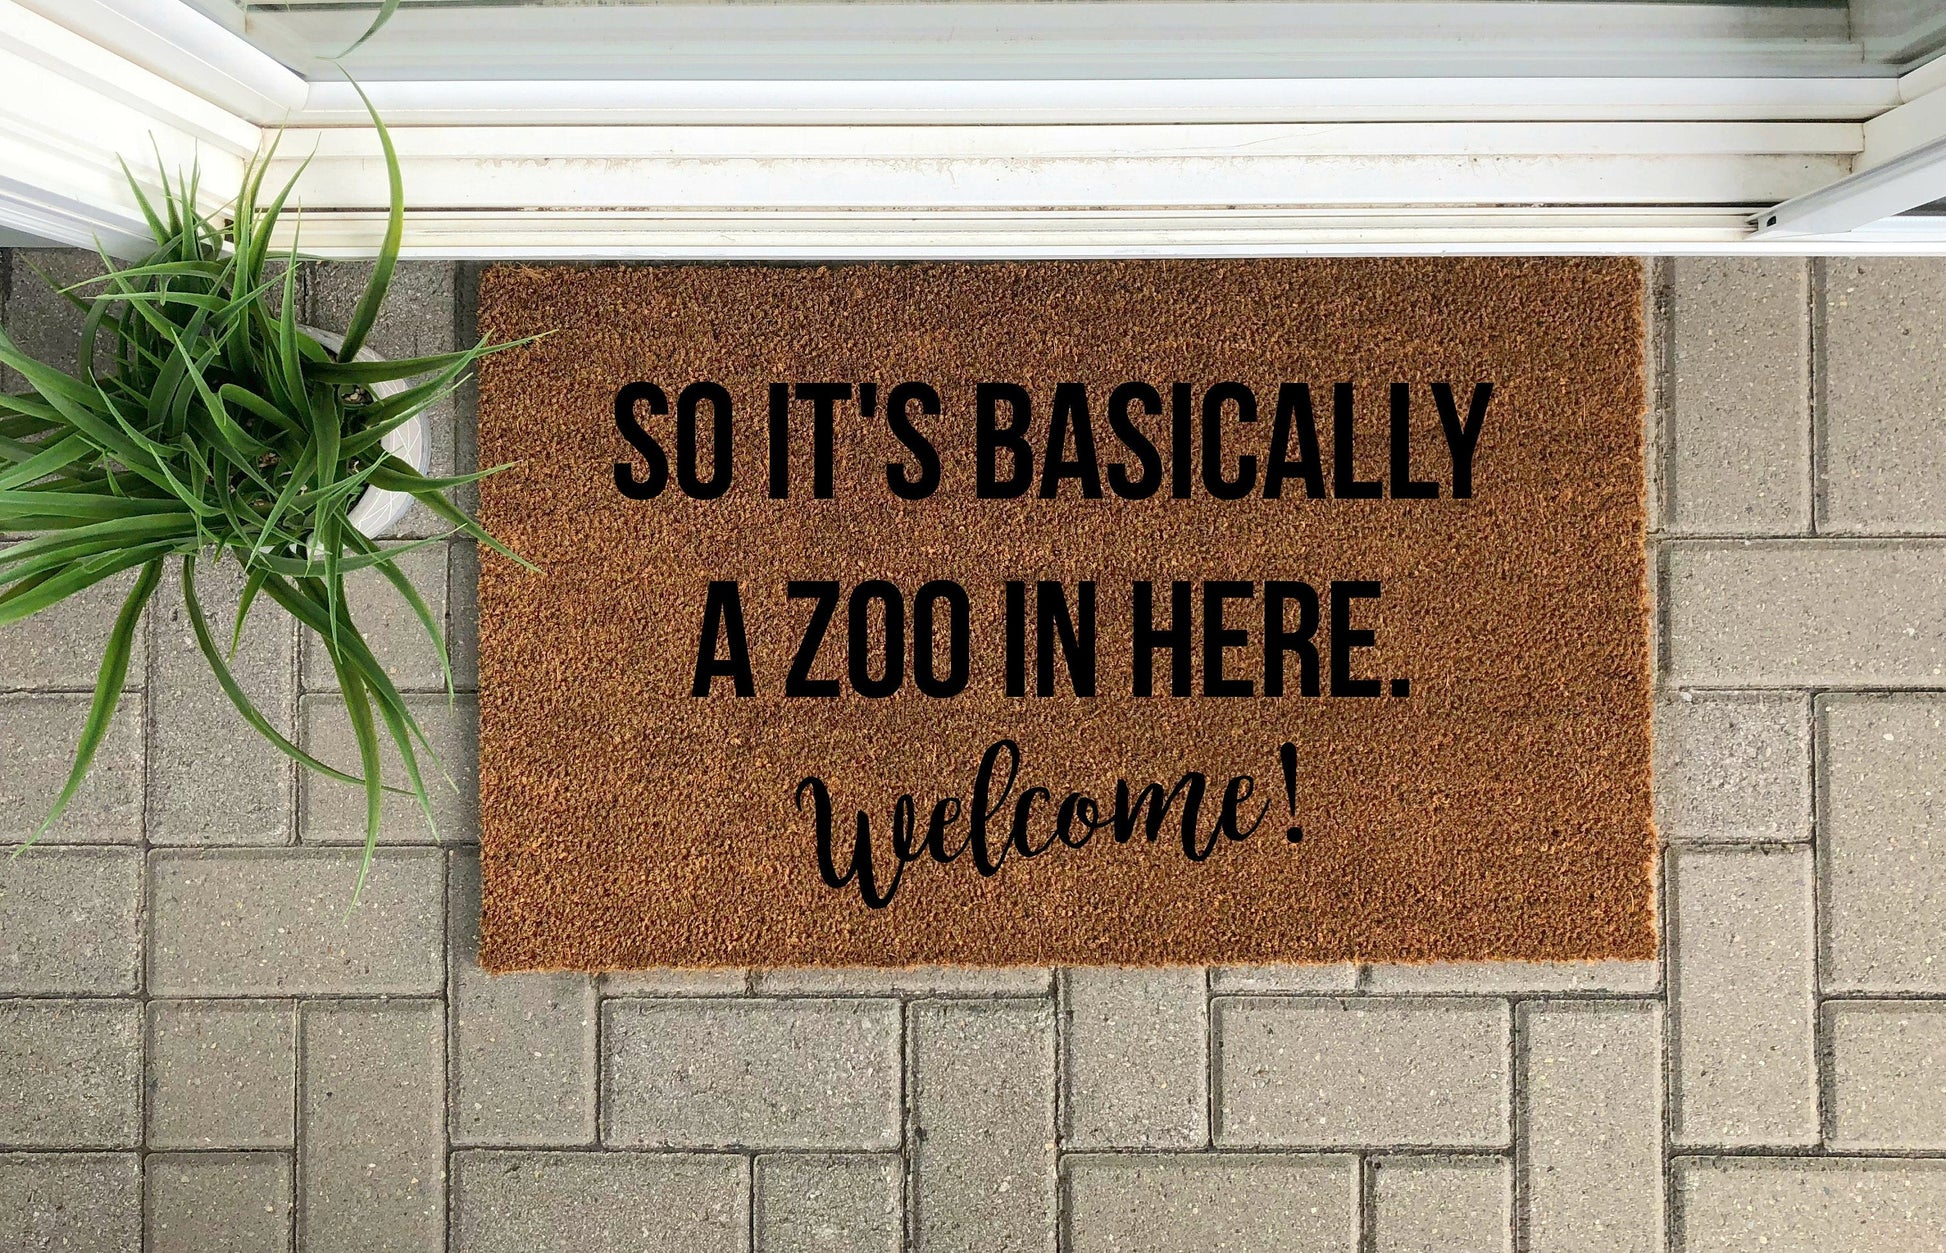 So It's Basically a Zoo In Here, Welcome! Doormat - The Minted Grove